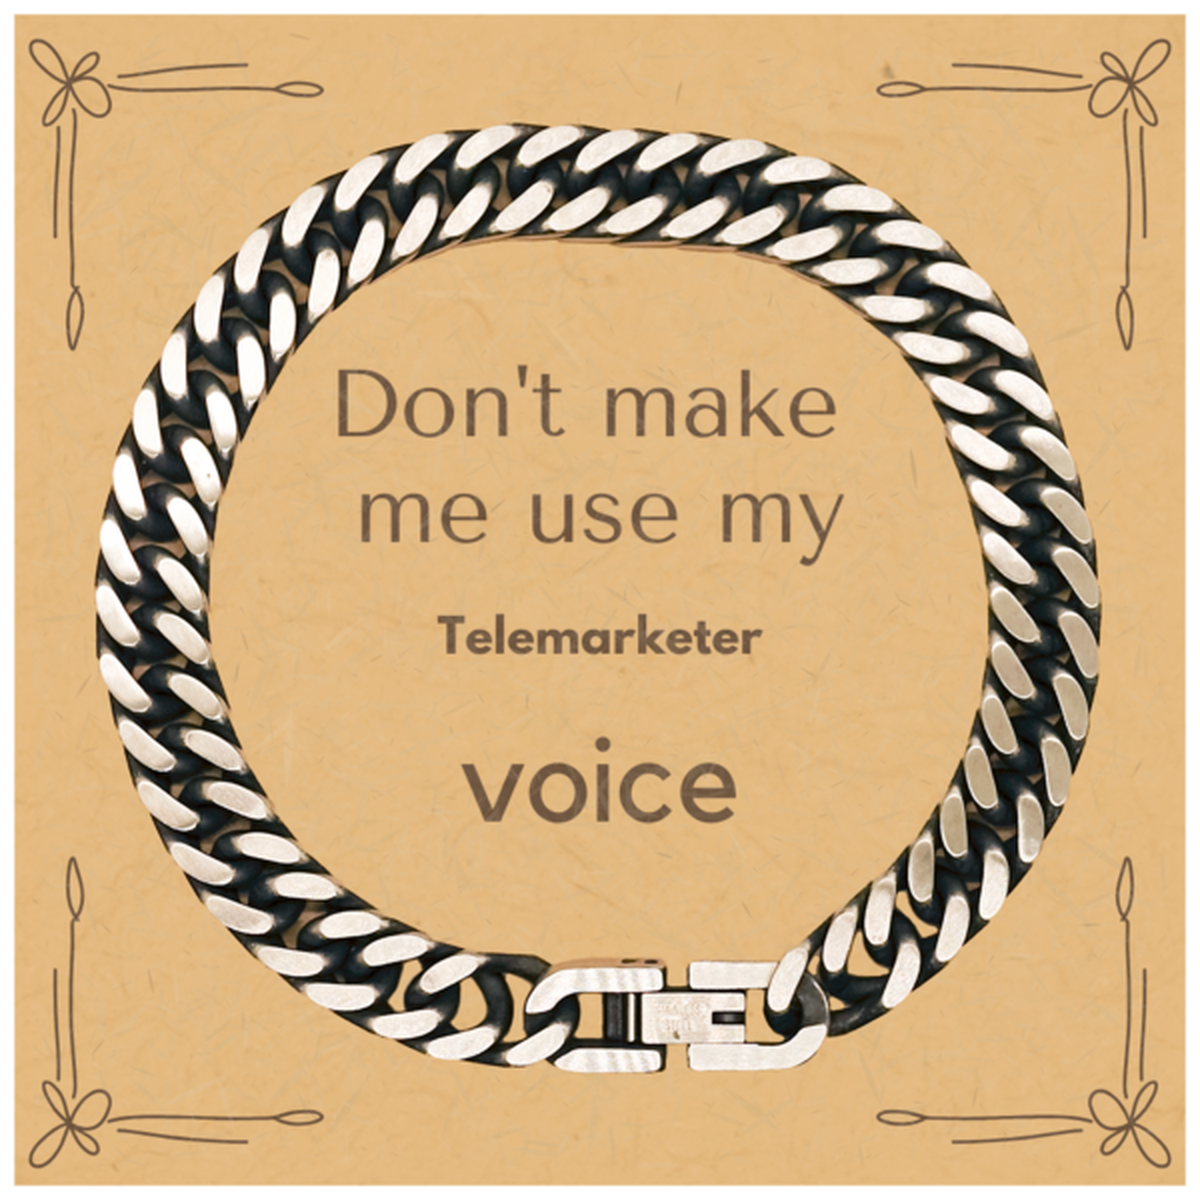 Don't make me use my Telemarketer voice, Sarcasm Telemarketer Card Gifts, Christmas Telemarketer Cuban Link Chain Bracelet Birthday Unique Gifts For Telemarketer Coworkers, Men, Women, Colleague, Friends